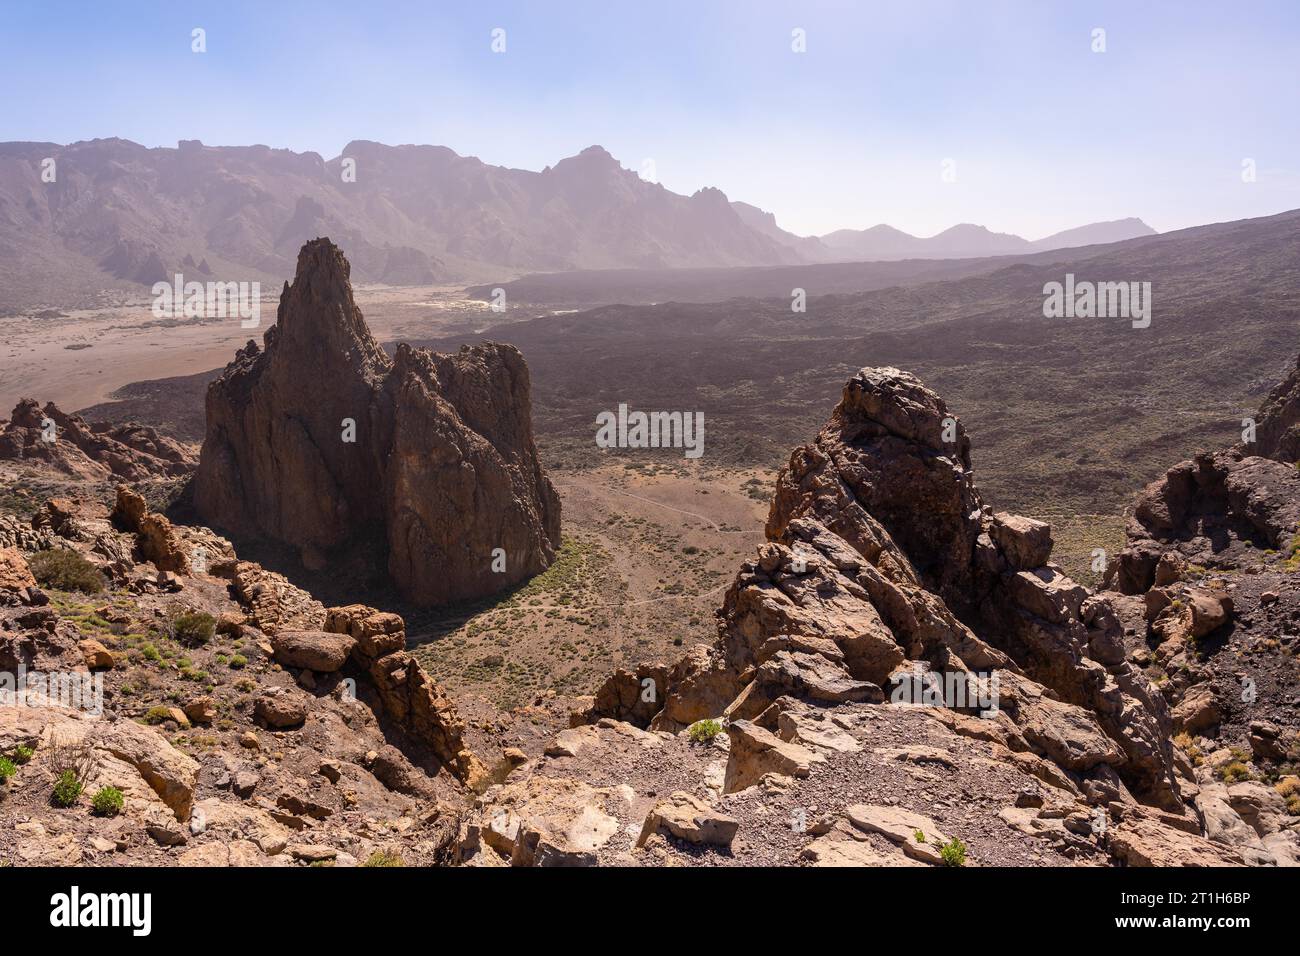 The mountain of the Cathedral between the Roques de Gracia and the Roque Cinchado in the natural area of Teide in Tenerife, Canary Islands Stock Photo